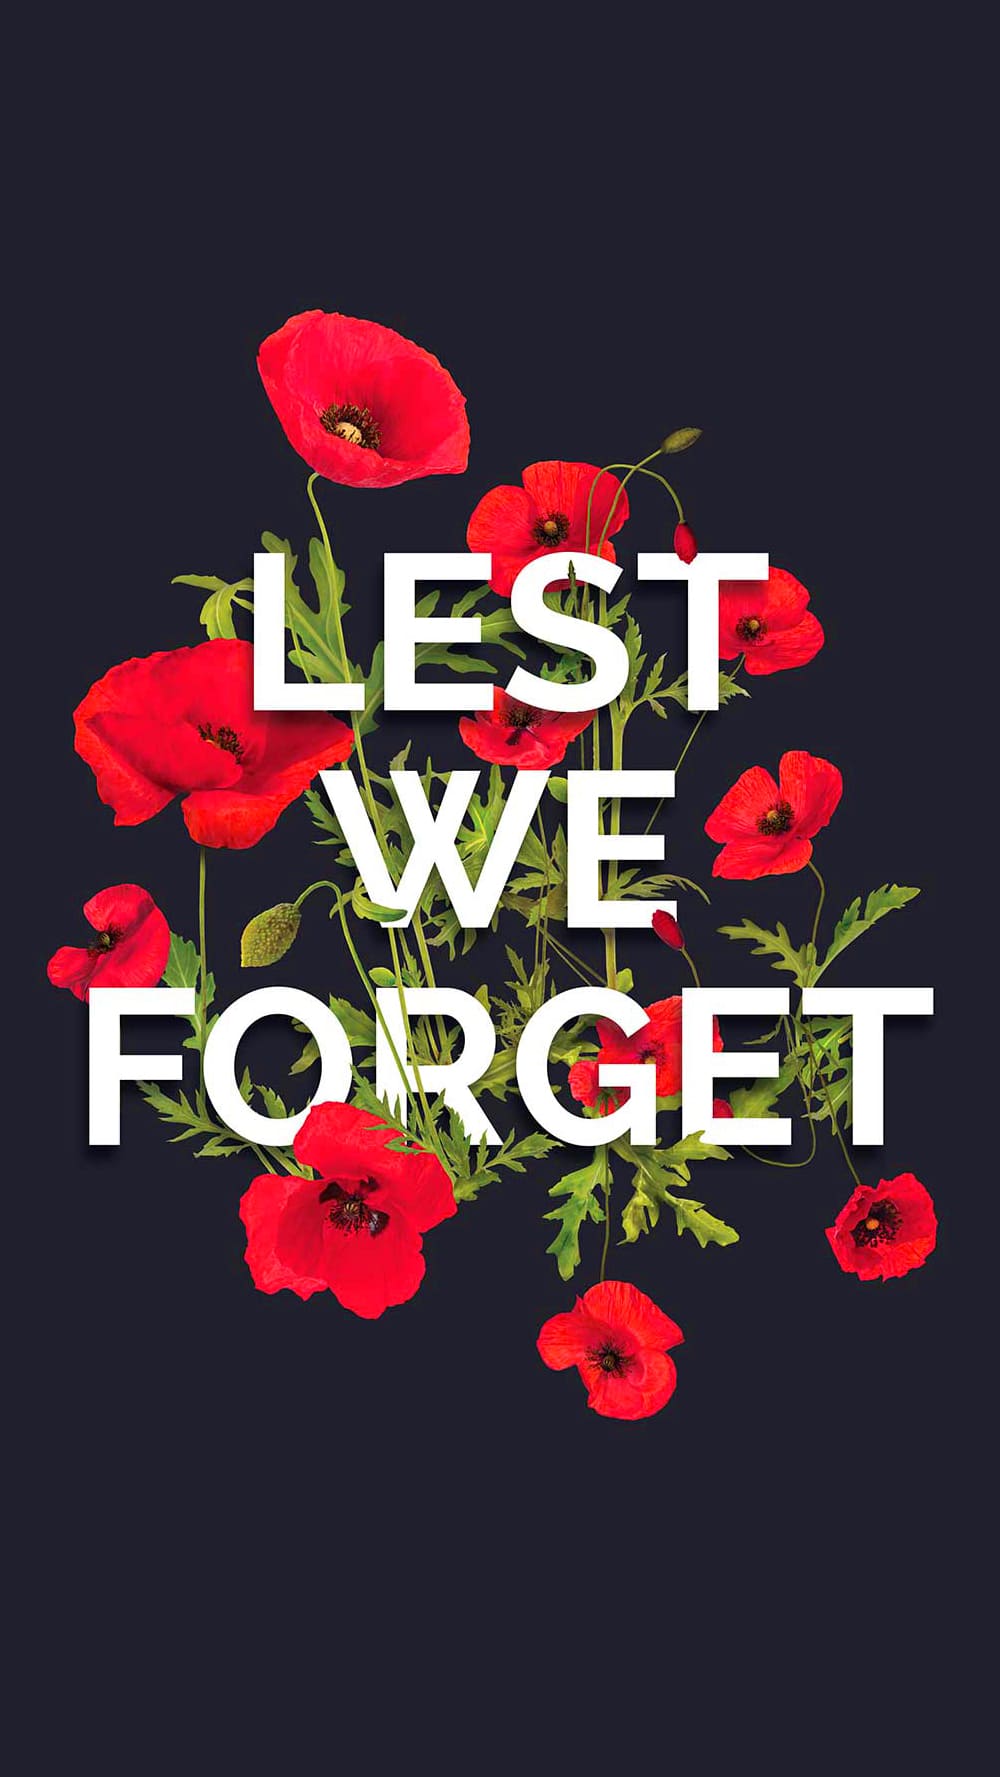 Lest We Forget Wallpapers